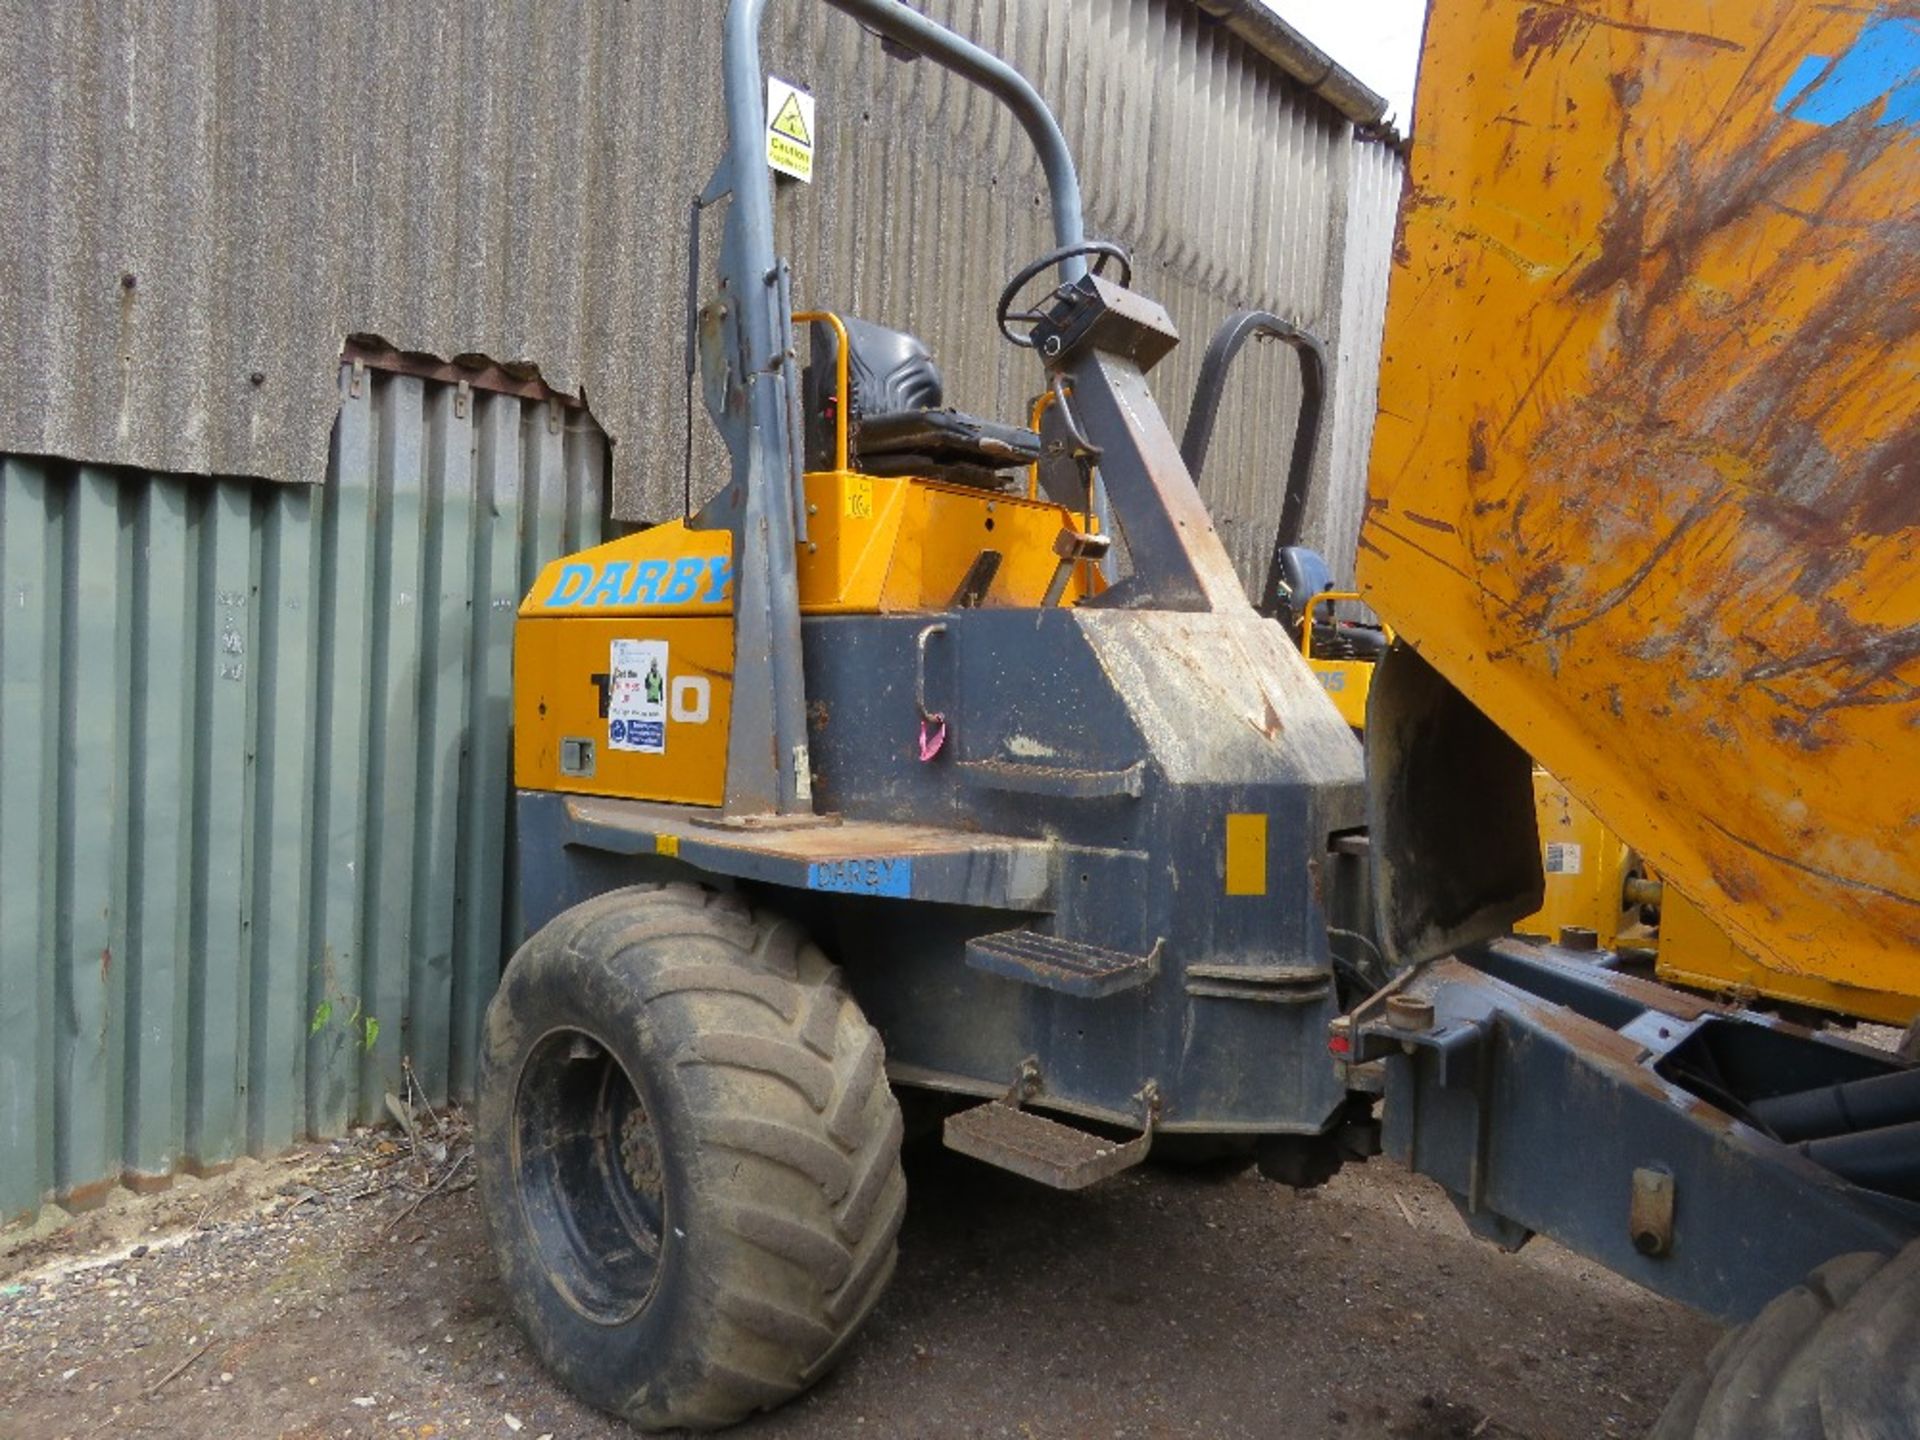 TEREX TA10 SITE DUMPER, 10 TONNE CAPACITY, YEAR 2008 BUILD. 4028 REC HOURS. PN:10D02. WHEN TESTED W - Image 4 of 15